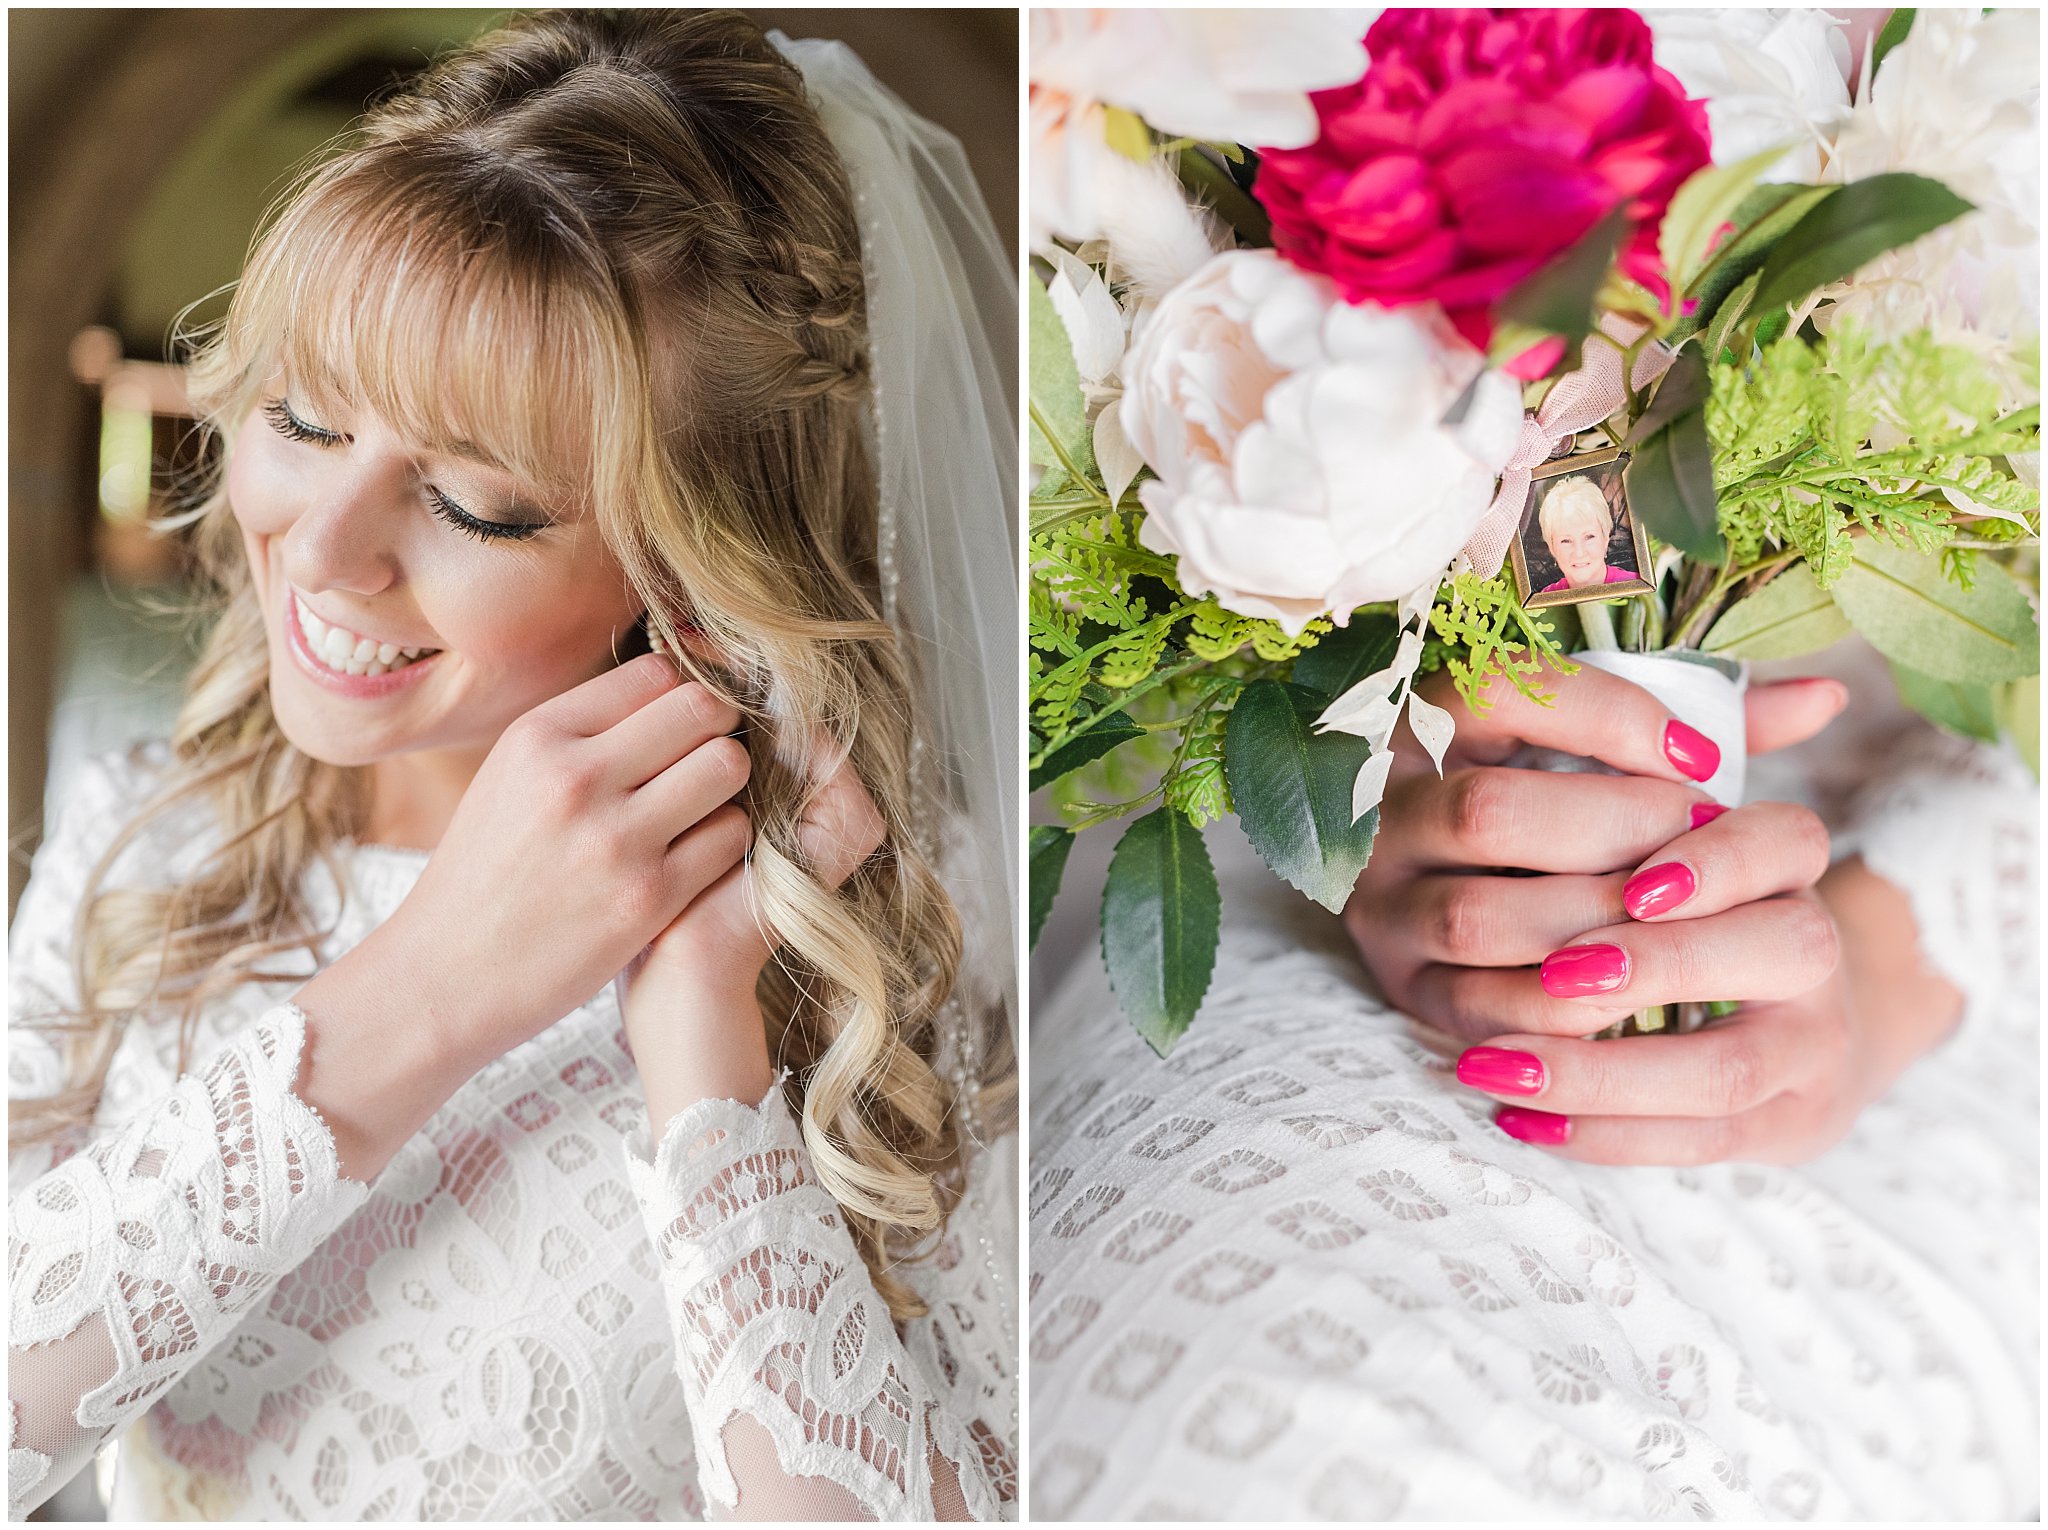 Bride getting ready with lace dress and white with deep pink florals | Wadley Farms Summer Wedding | Jessie and Dallin Photography